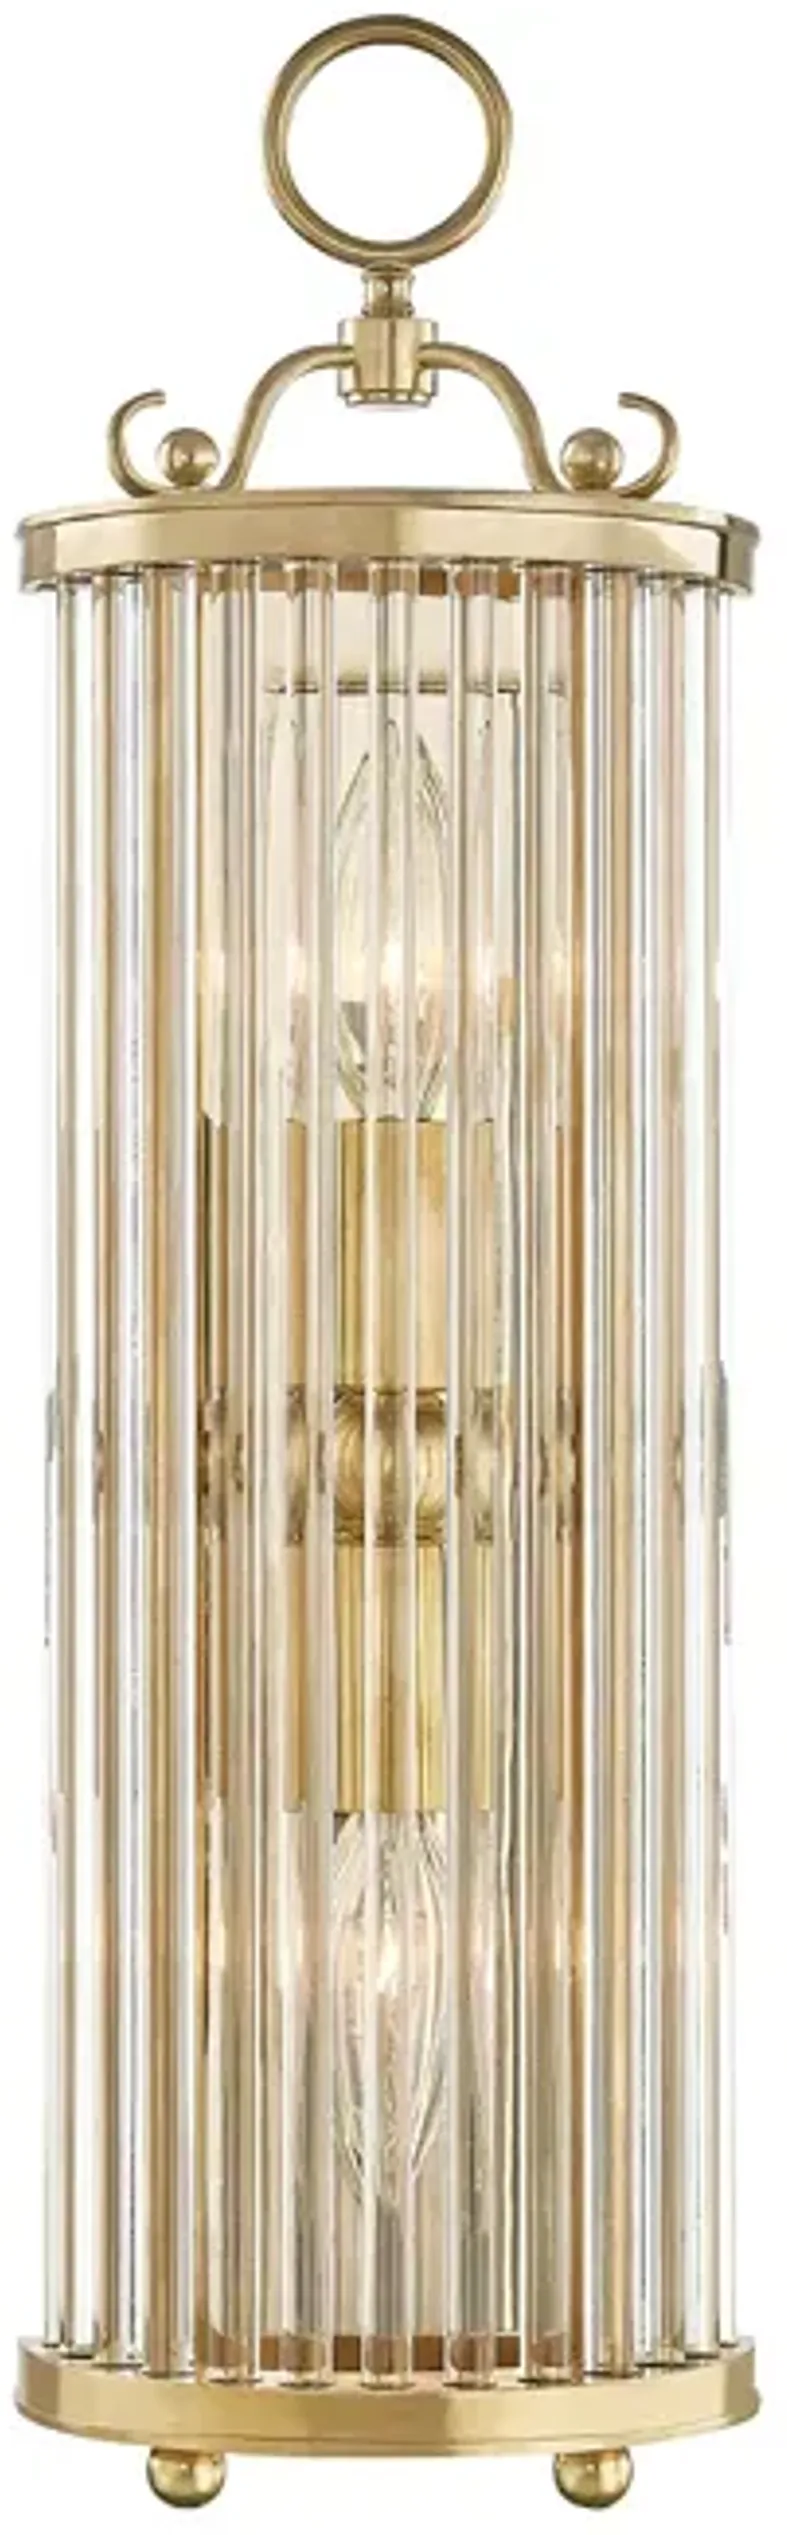 Hudson Valley Lighting Glass No.2 by Mark D. Sikes, Two-Light Wall Sconce